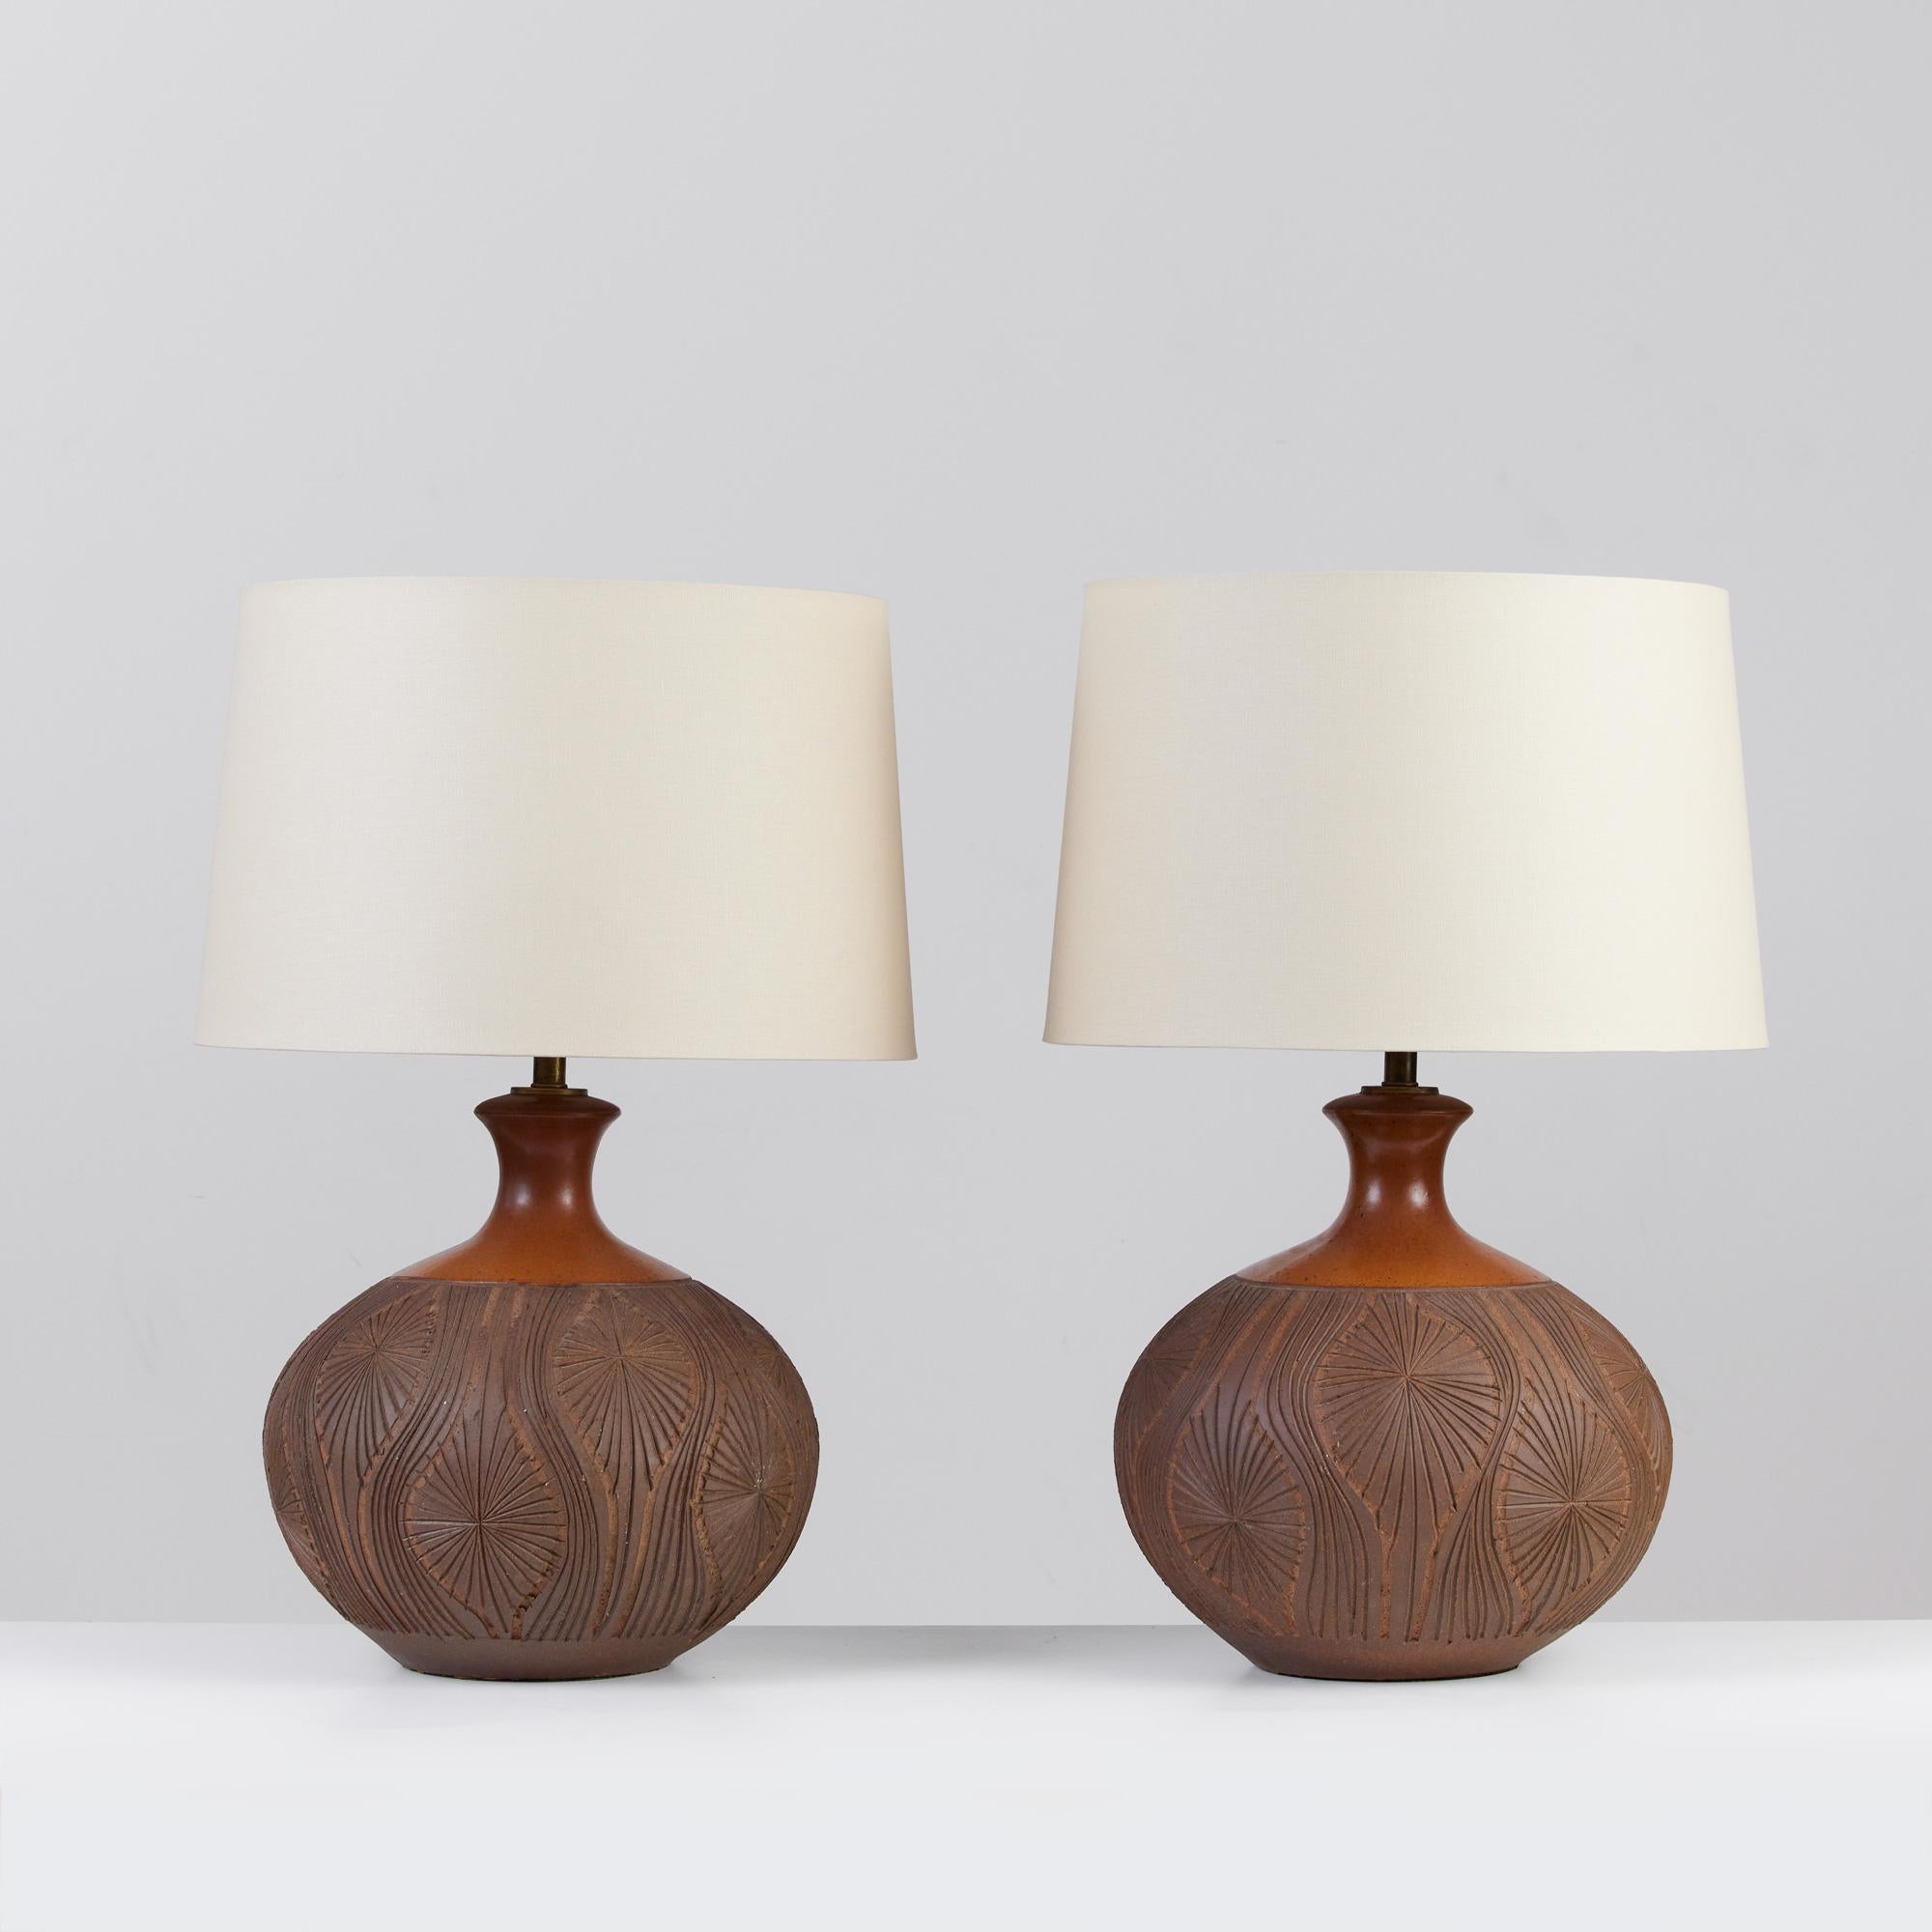 This pair of table lamps is a result of the collaboration between David Cressey & Robert Maxwell to create their line, Earthgender. The wheel thrown stoneware lamps feature the iconic 